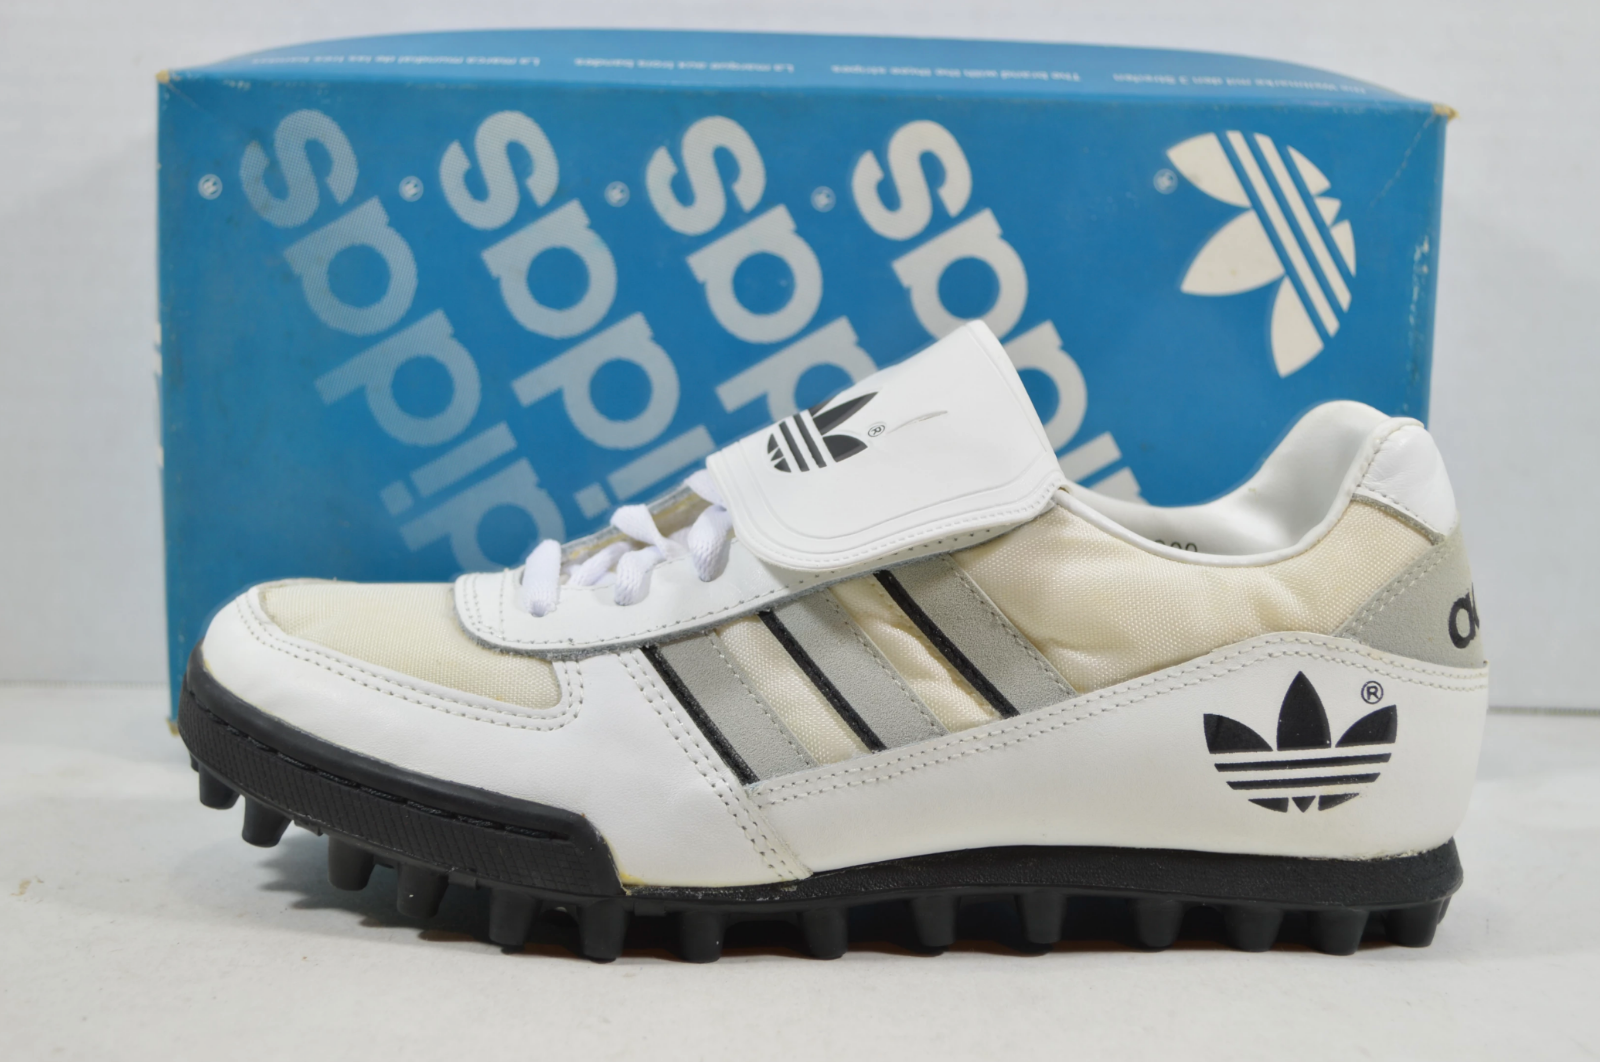 Vintage 80s New Adidas Mens 6.5 Sudden Impact Football Soccer Turf Cleats White - Men